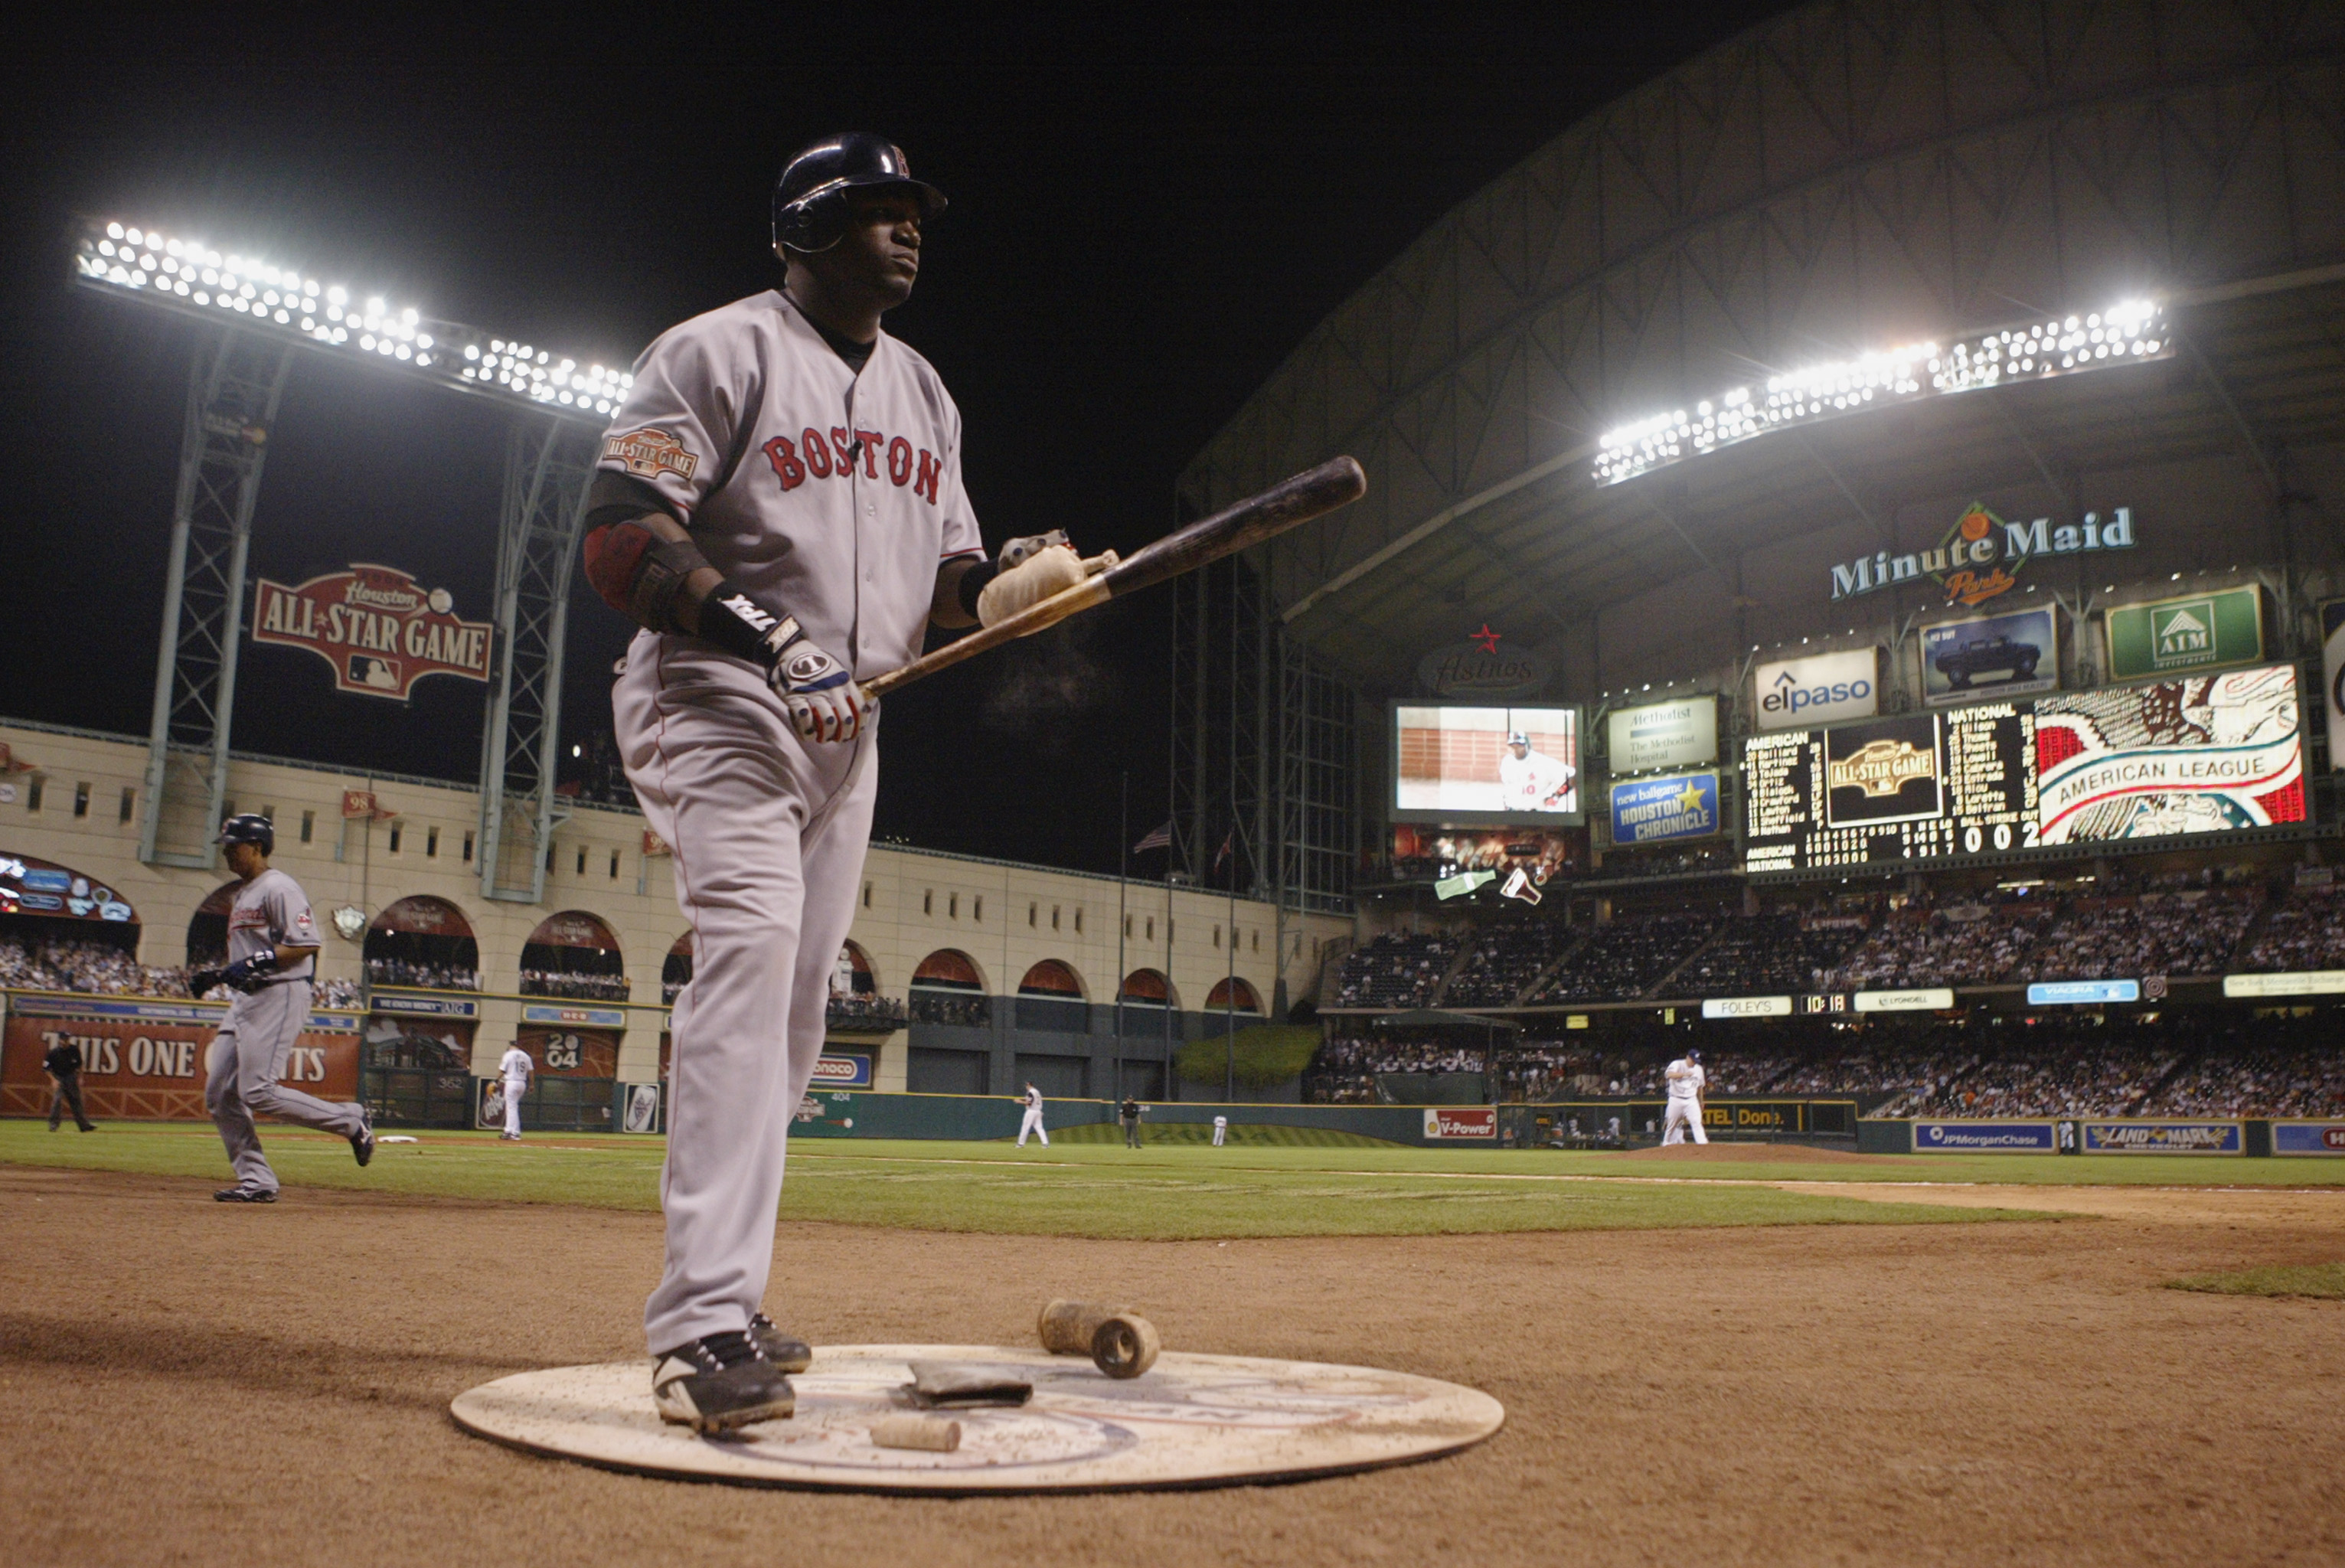 David Ortiz gets ready to hit in the 2004 MLB All-Star game in Houston. (Photo by Brian Bahr/Getty Images)